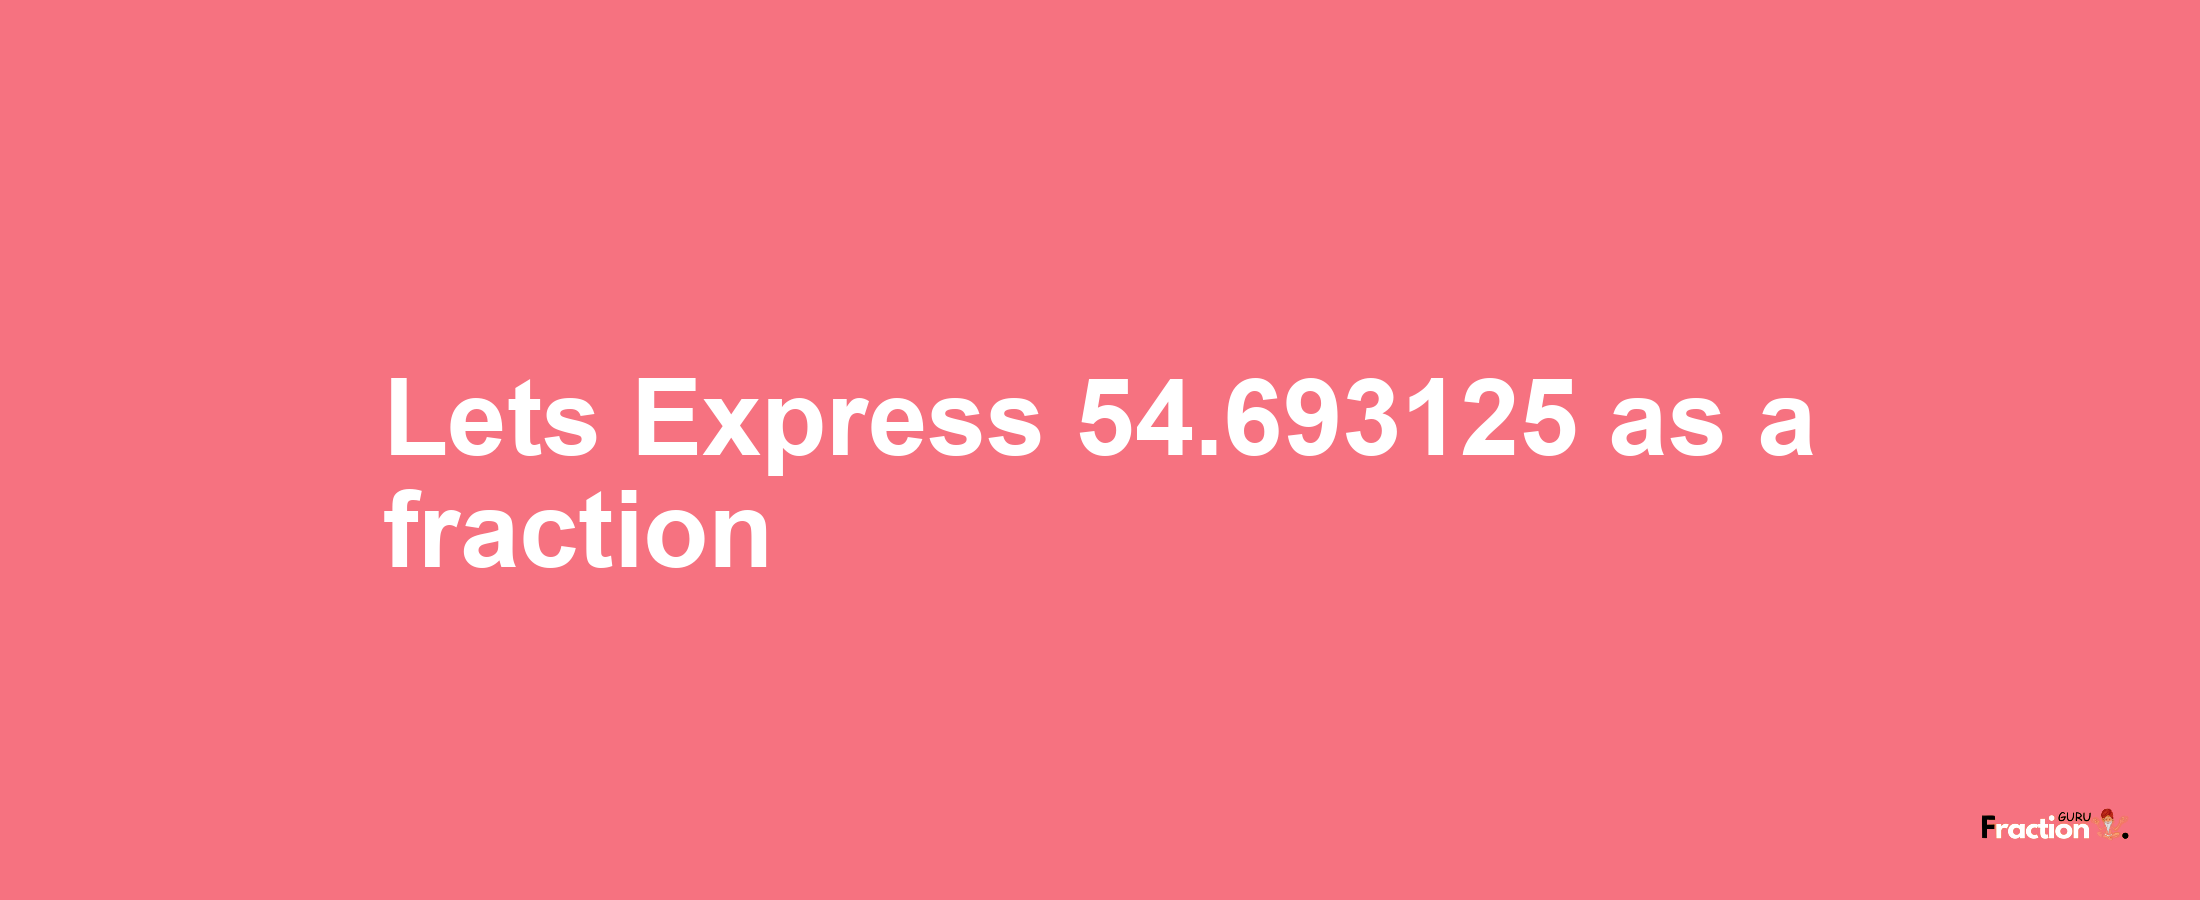 Lets Express 54.693125 as afraction